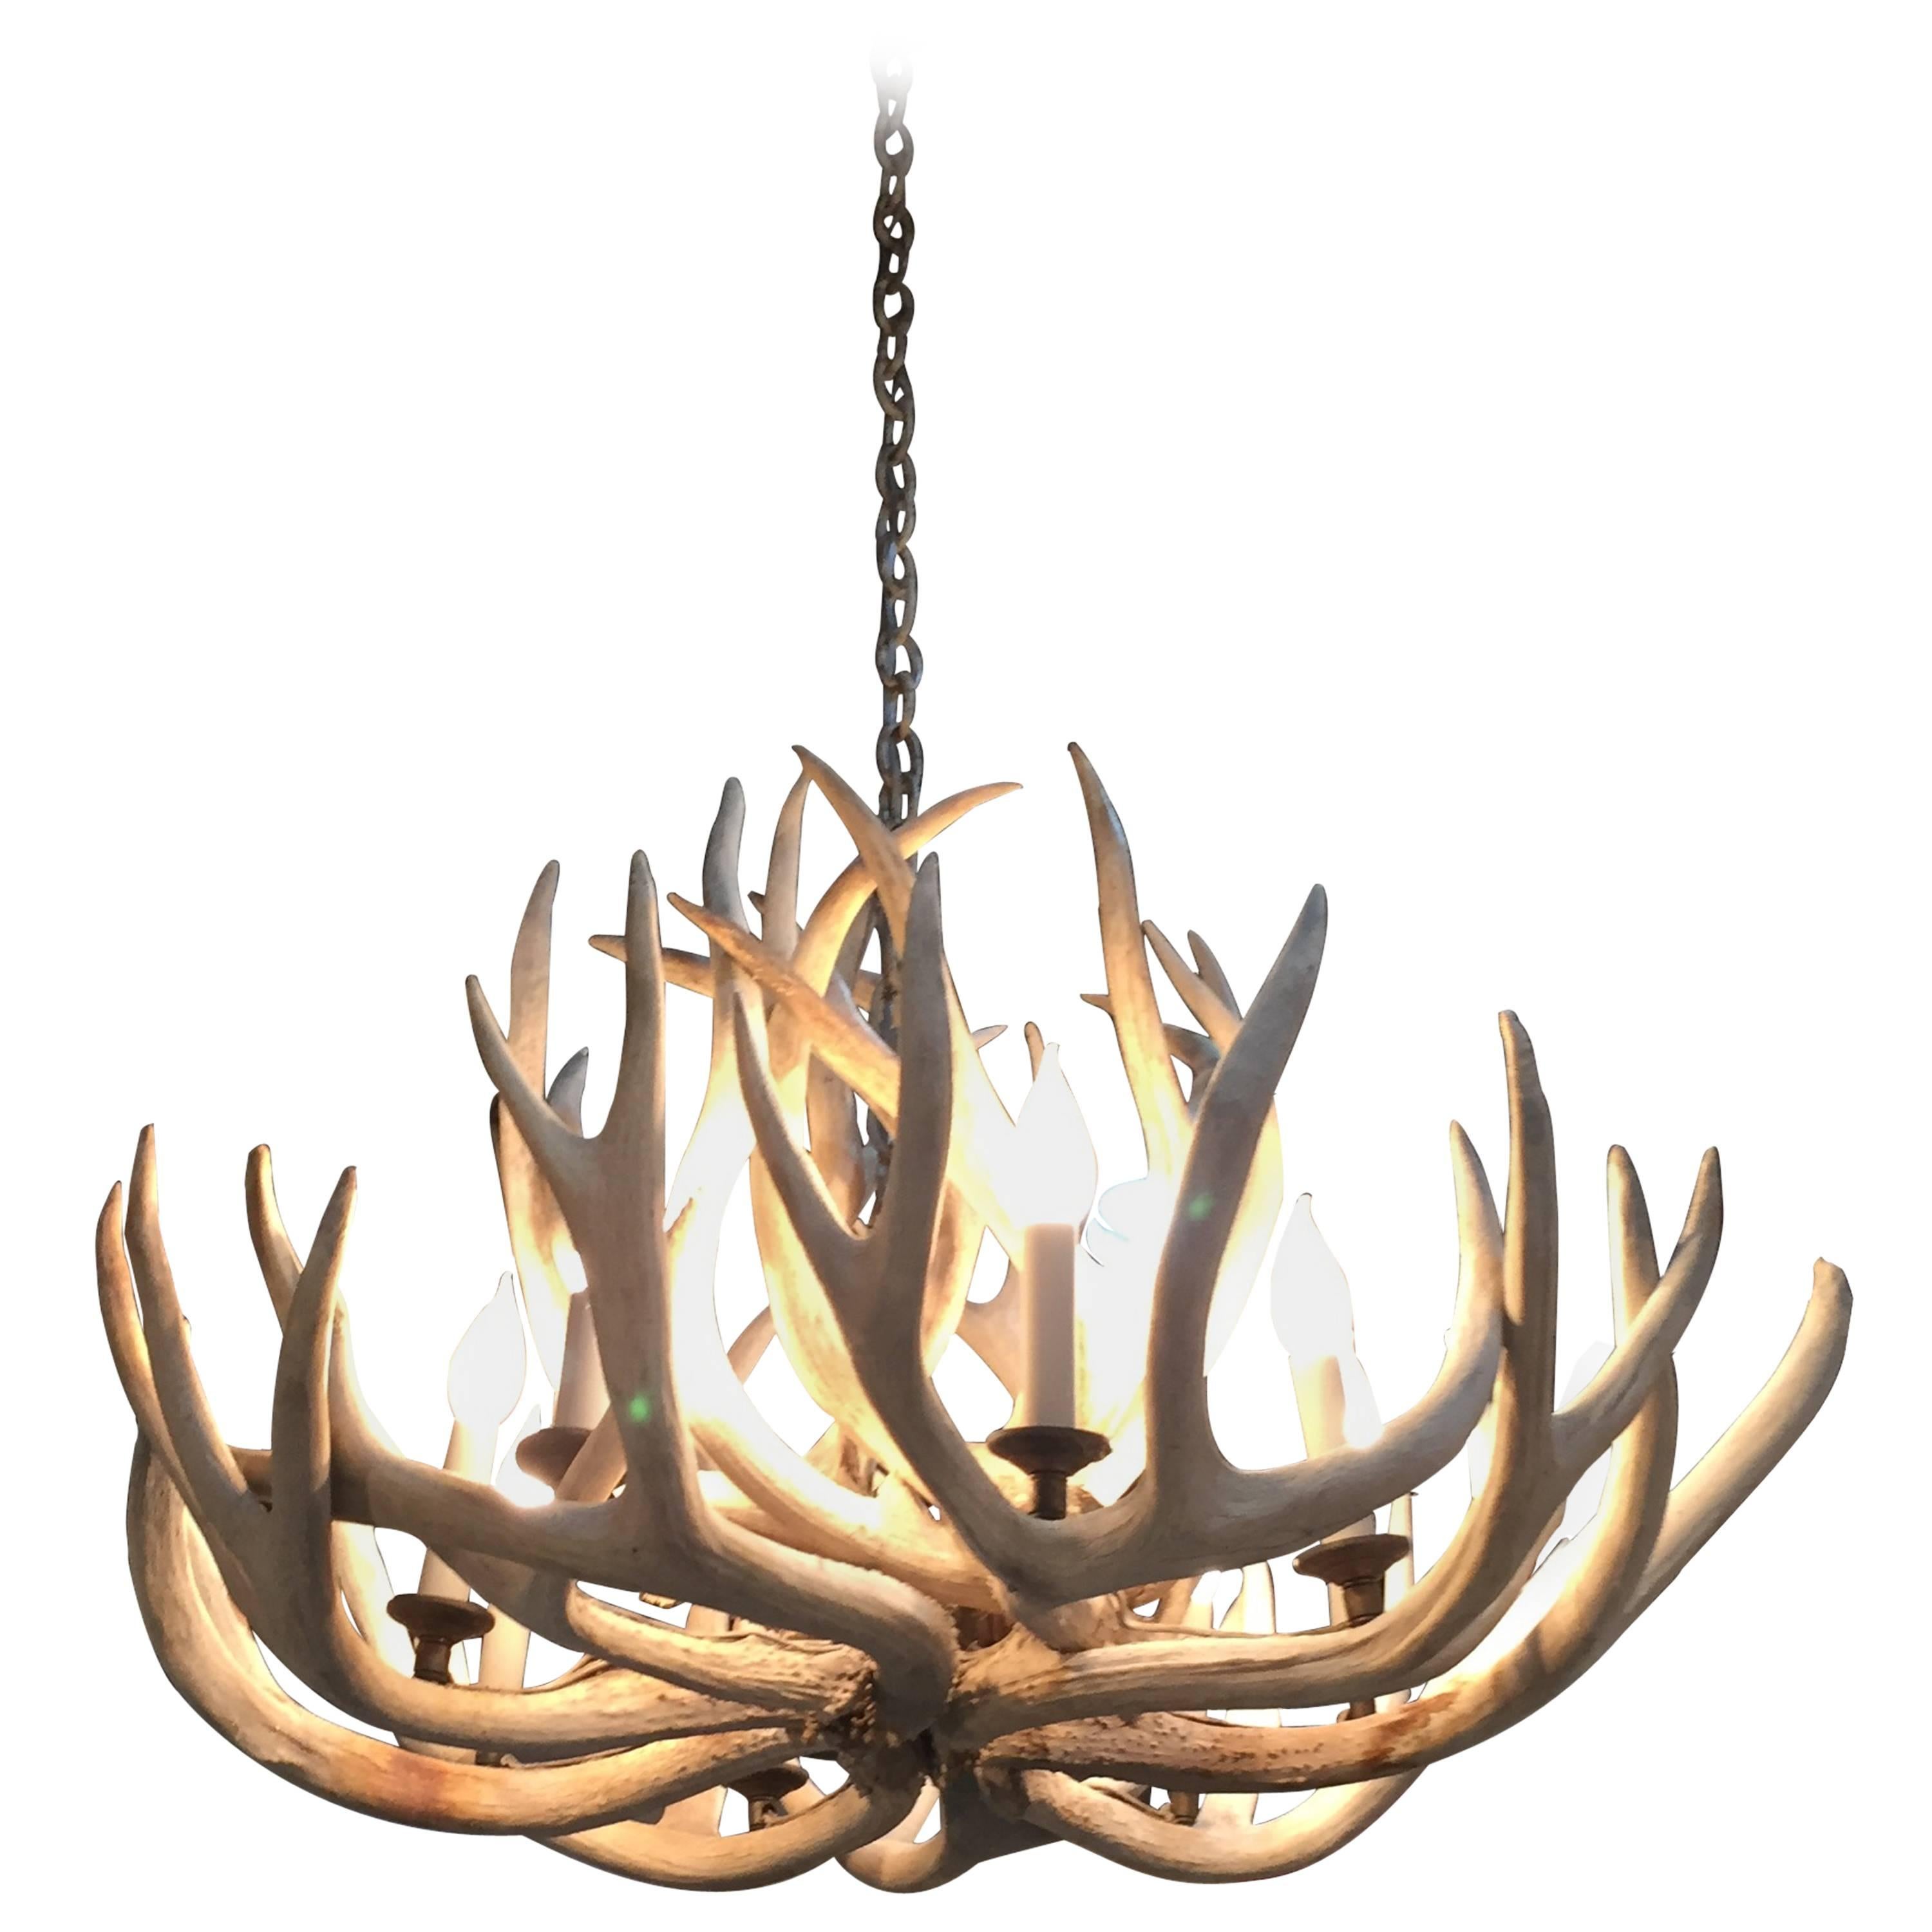 Very Impressive Authentic Antique Bleached Antler Chandelier For Sale